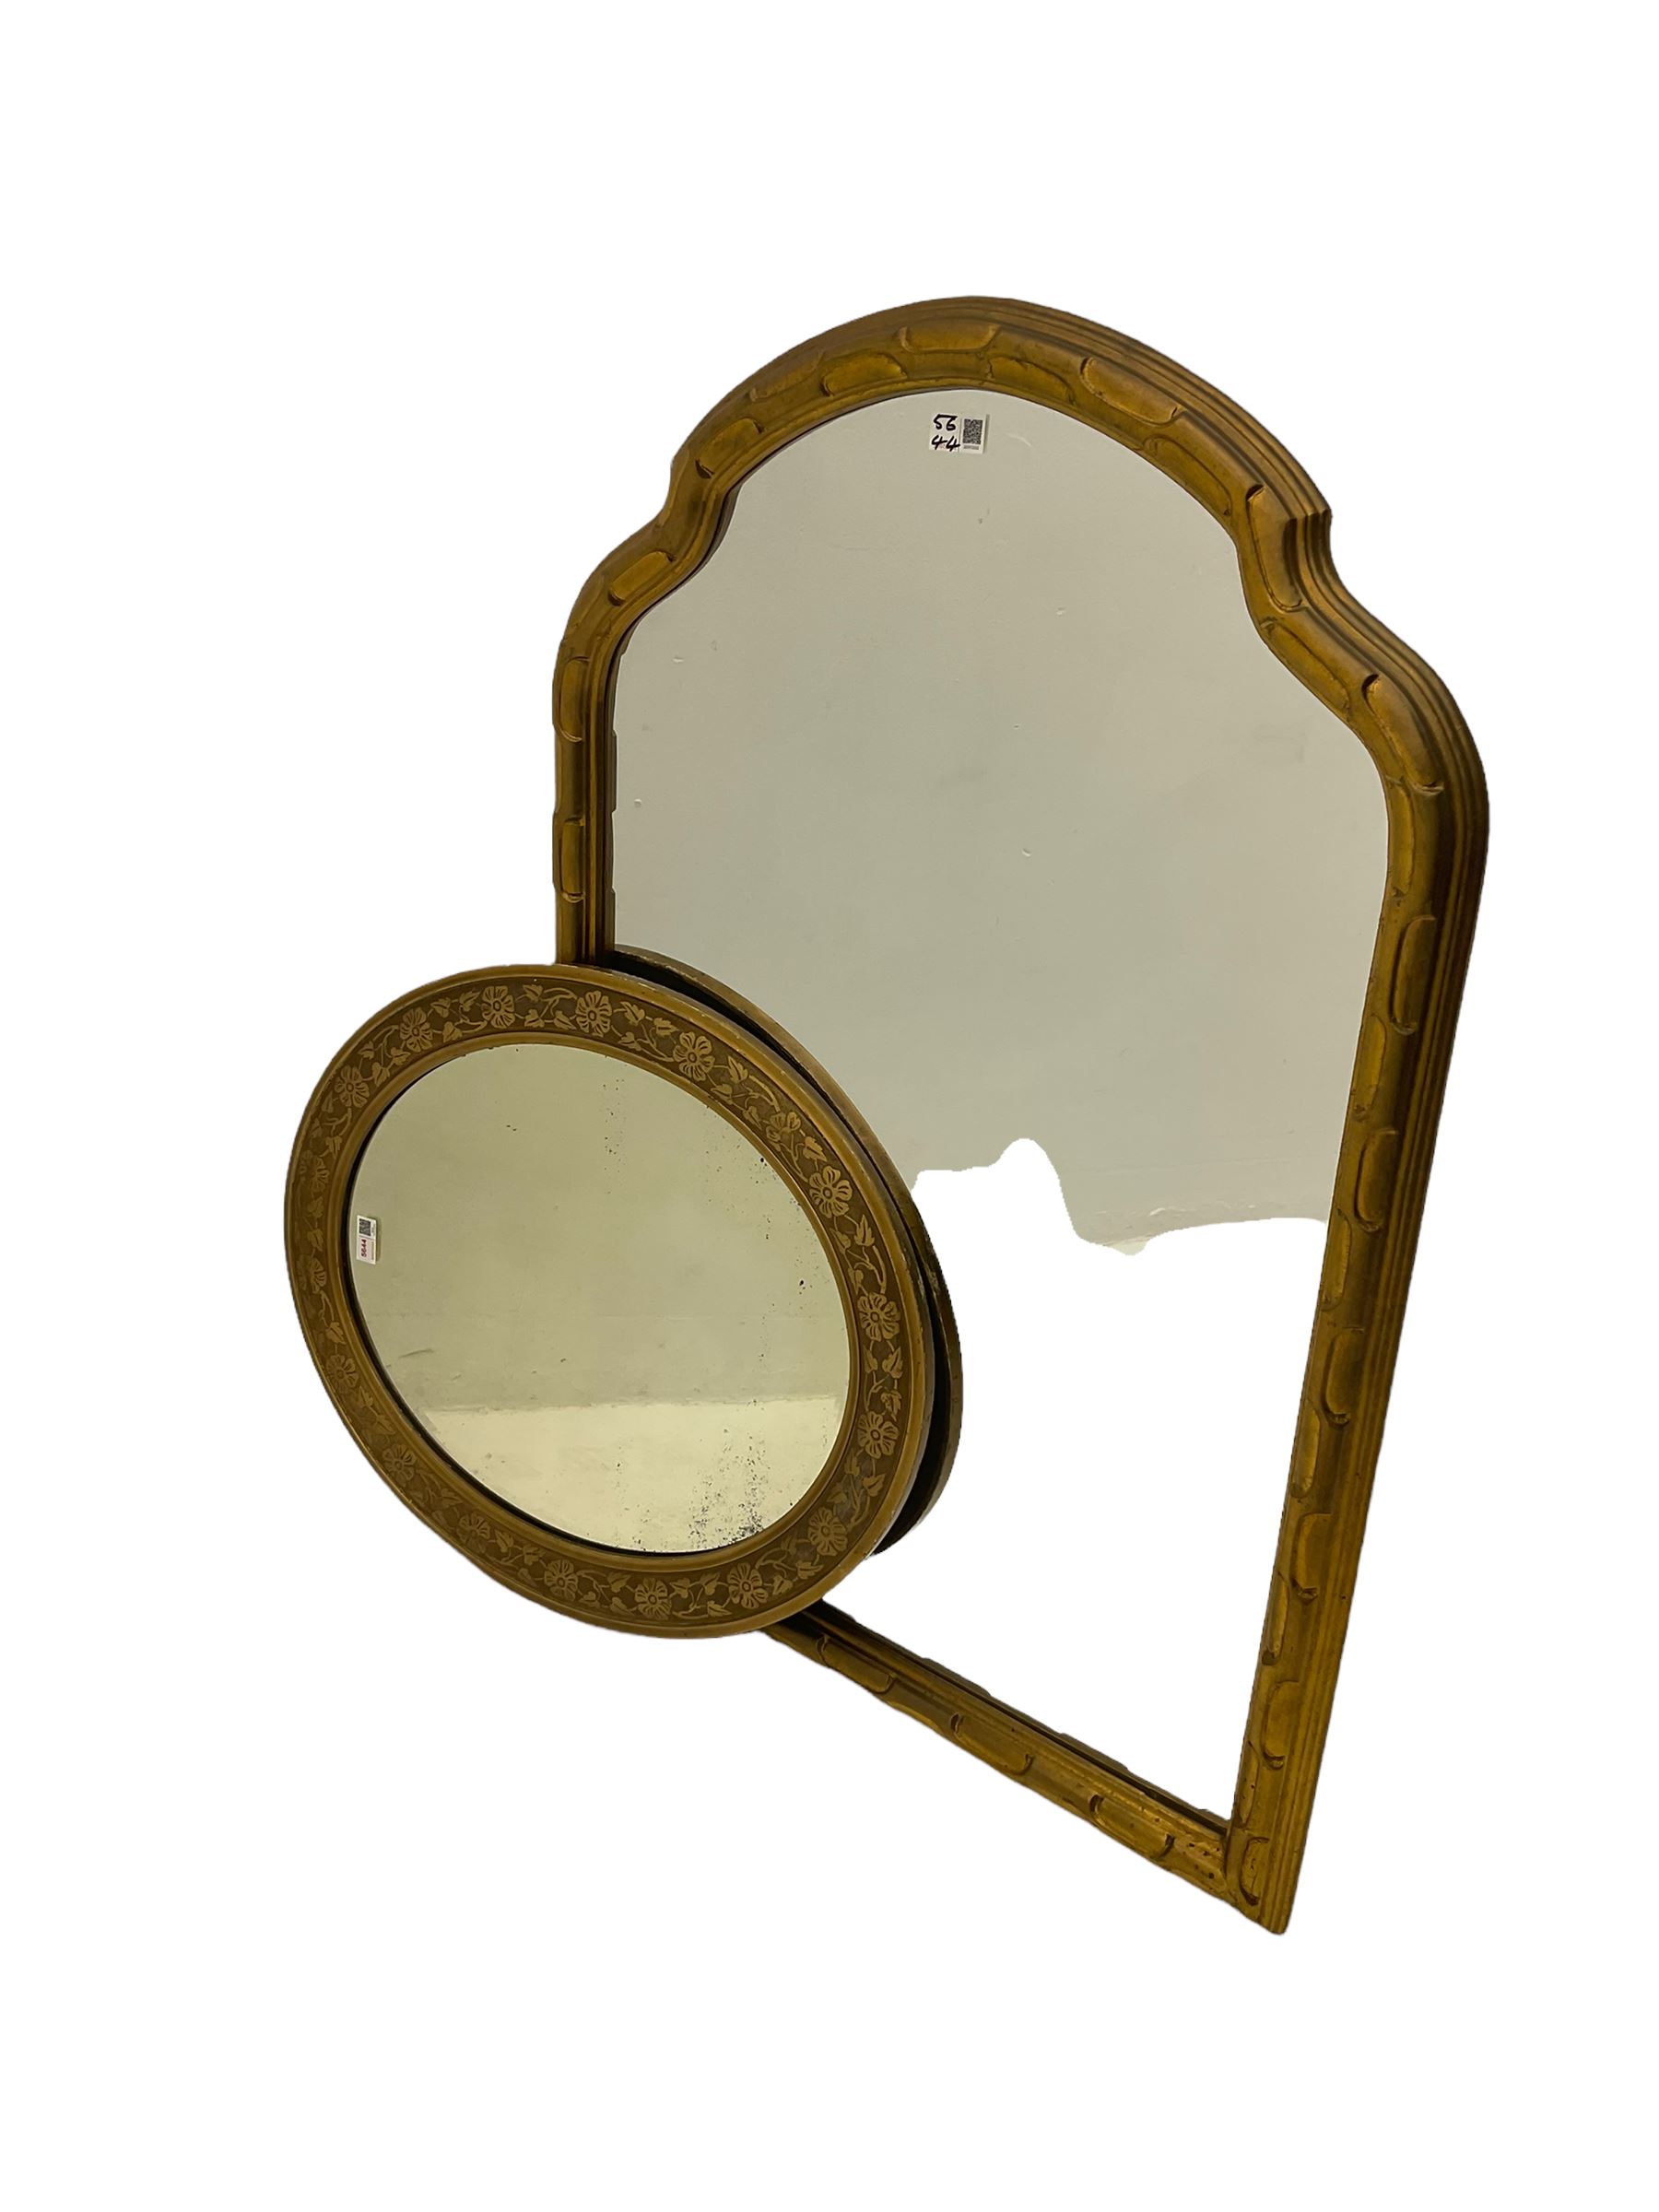 Shaped arch top wall mirror in gilt frame (68cm x 97cm) - Image 2 of 2